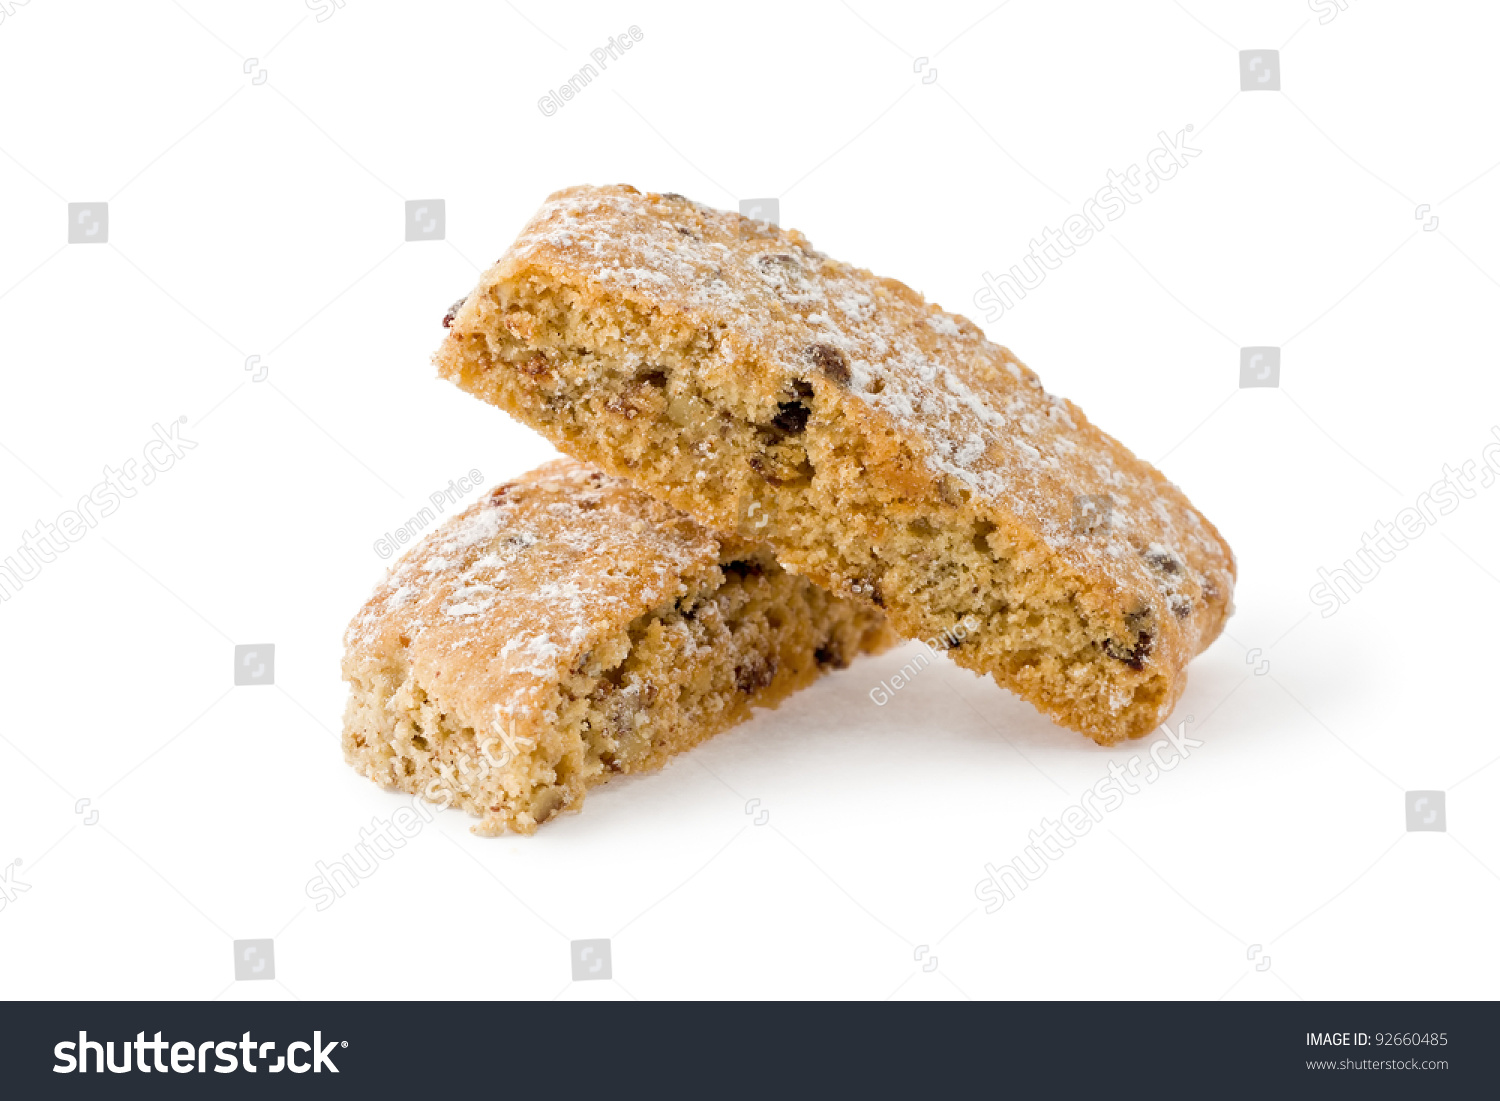 Two stacked pieces of jewish twice-baked almond cookies similar to biscotti against a white background. #92660485